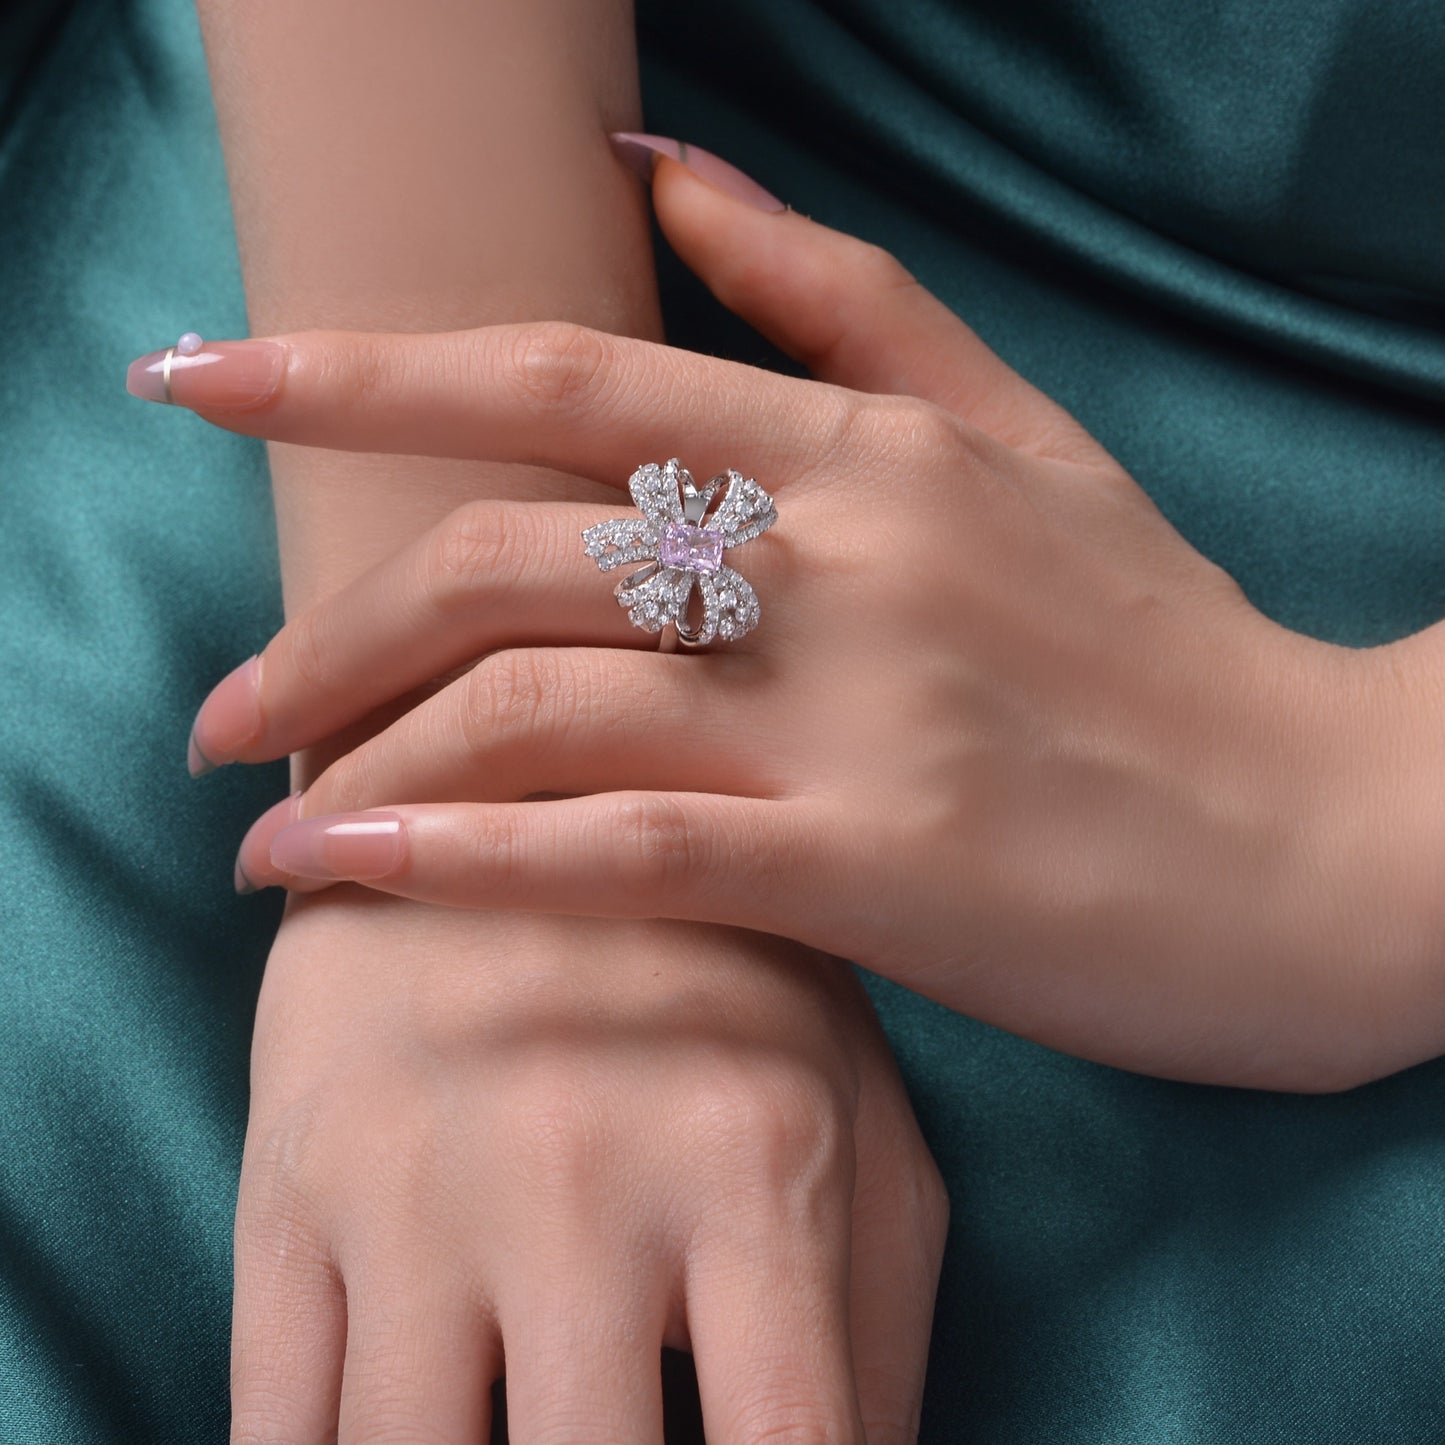 Tourmaline Butterfly Cocktail Ring R1262